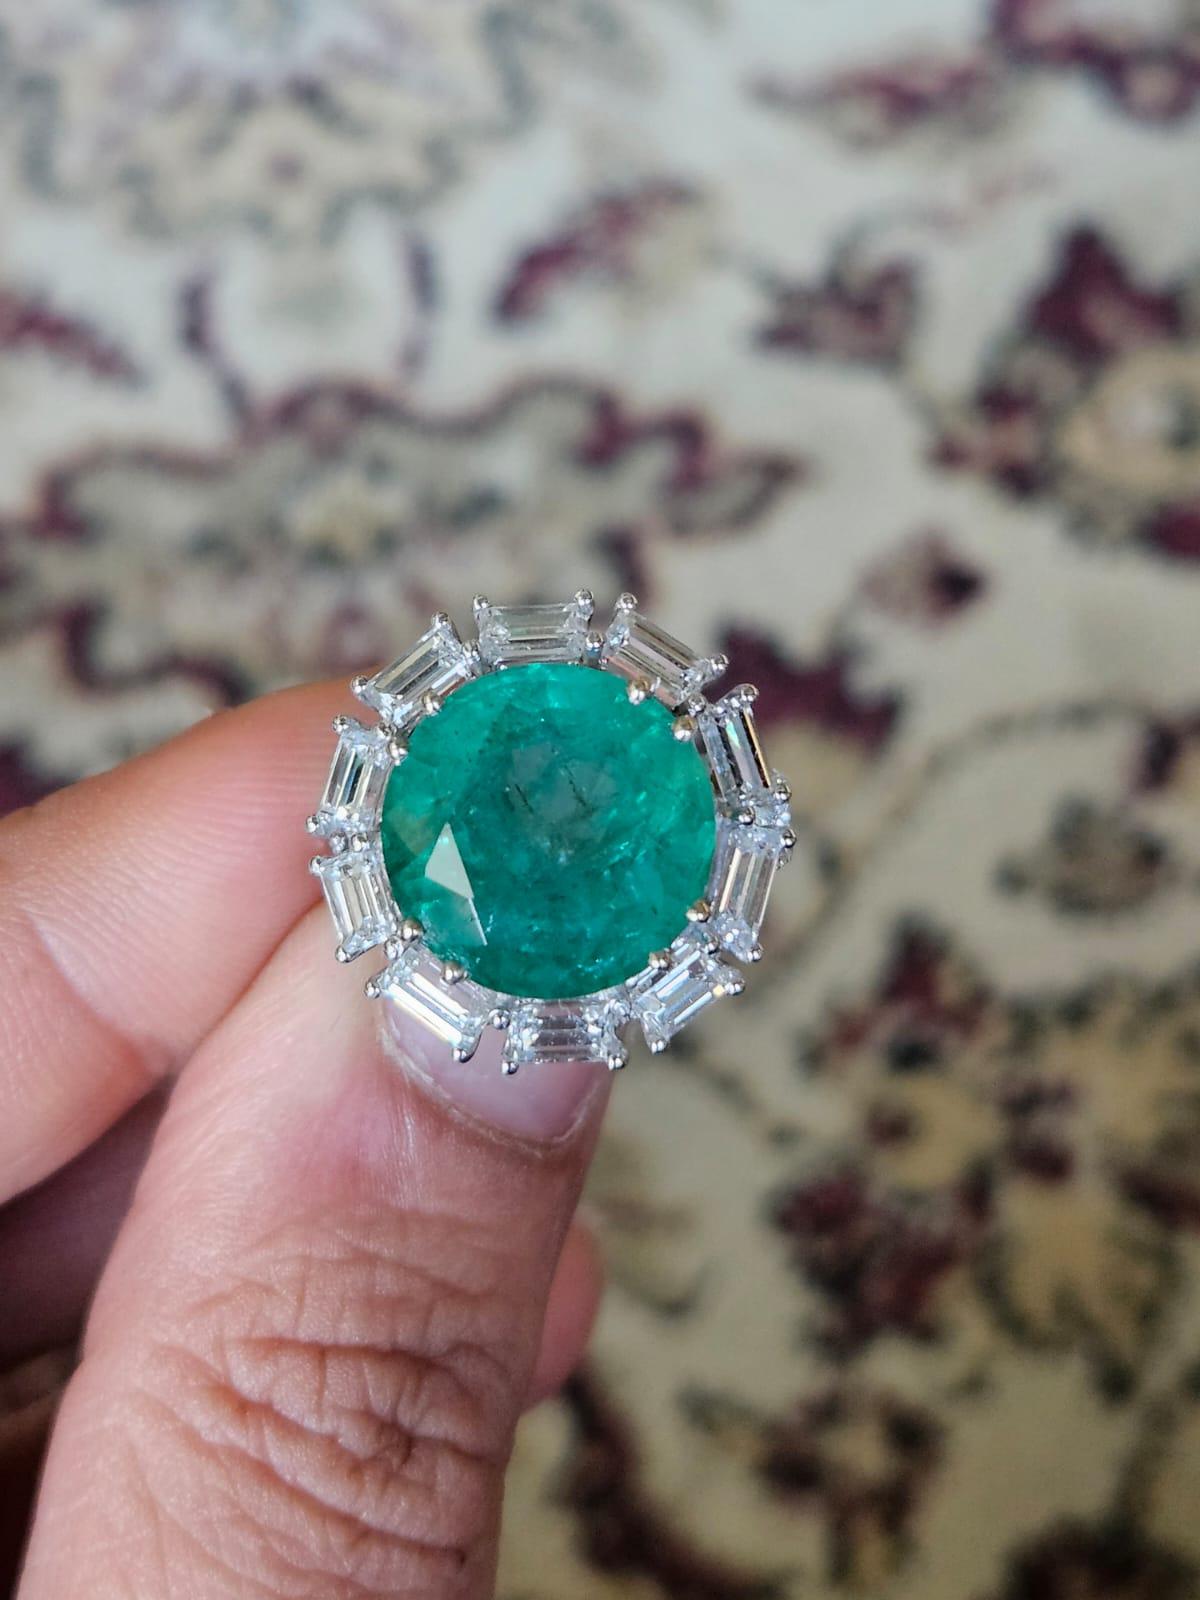 A very stunning and one of a kind, Emerald Engagement Ring set in 18K White Gold & Diamonds. The weight of the round Emerald is 9.49 carats. The Emerald is completely natural, without any treatment and is of Zambian origin. The combined weight of